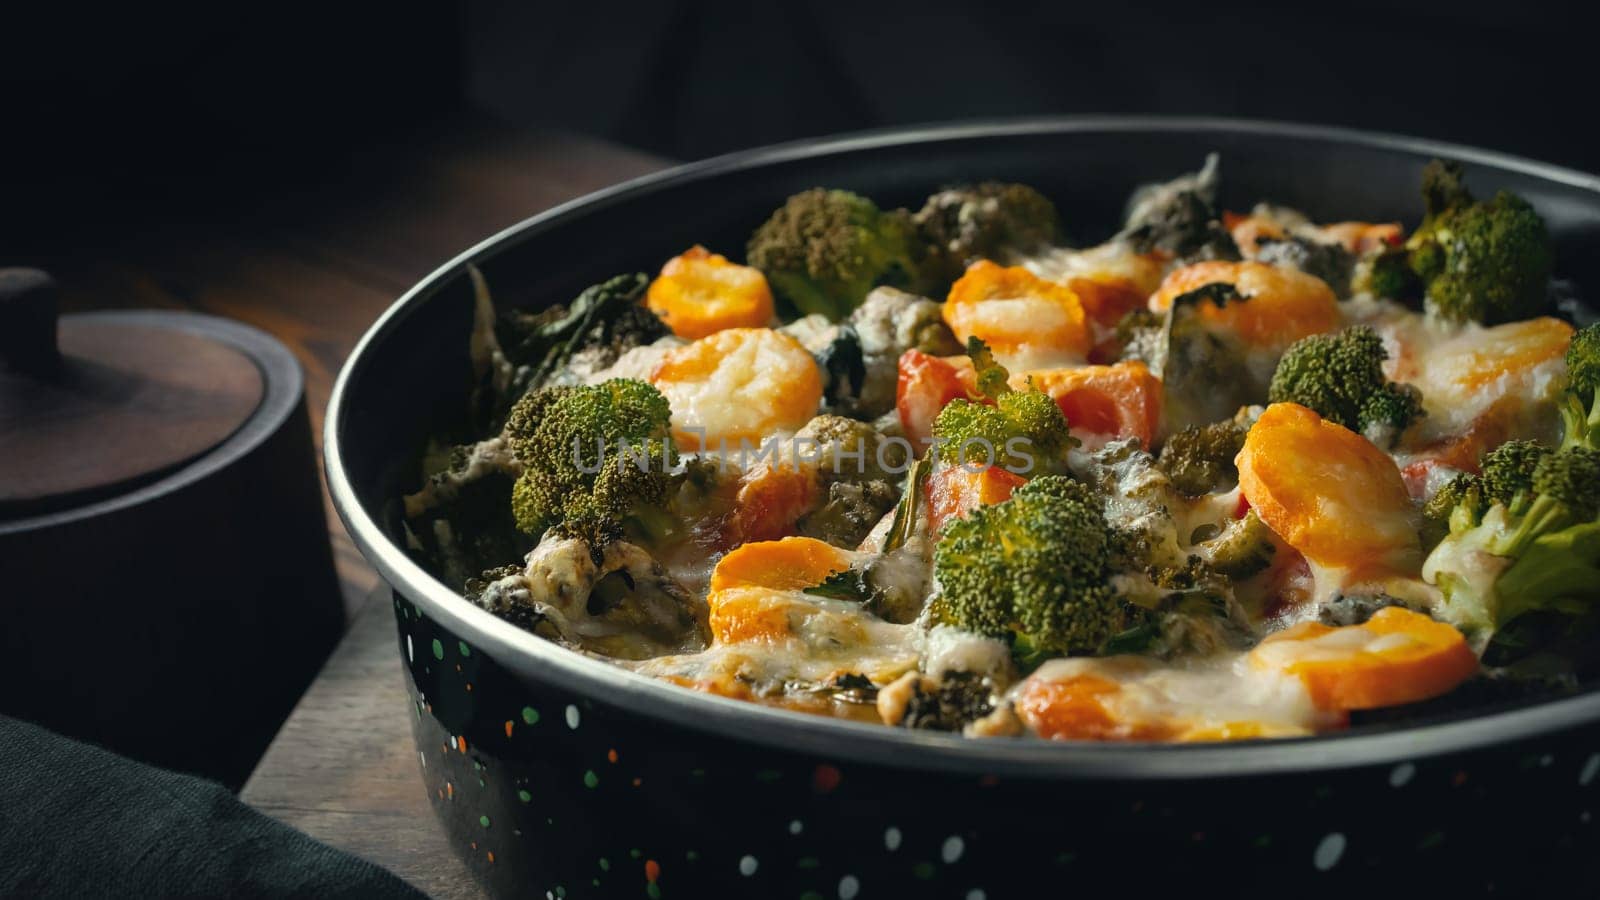 Gratin with broccoli, carrots and cheese baked in the oven on a dark wooden table by galsand